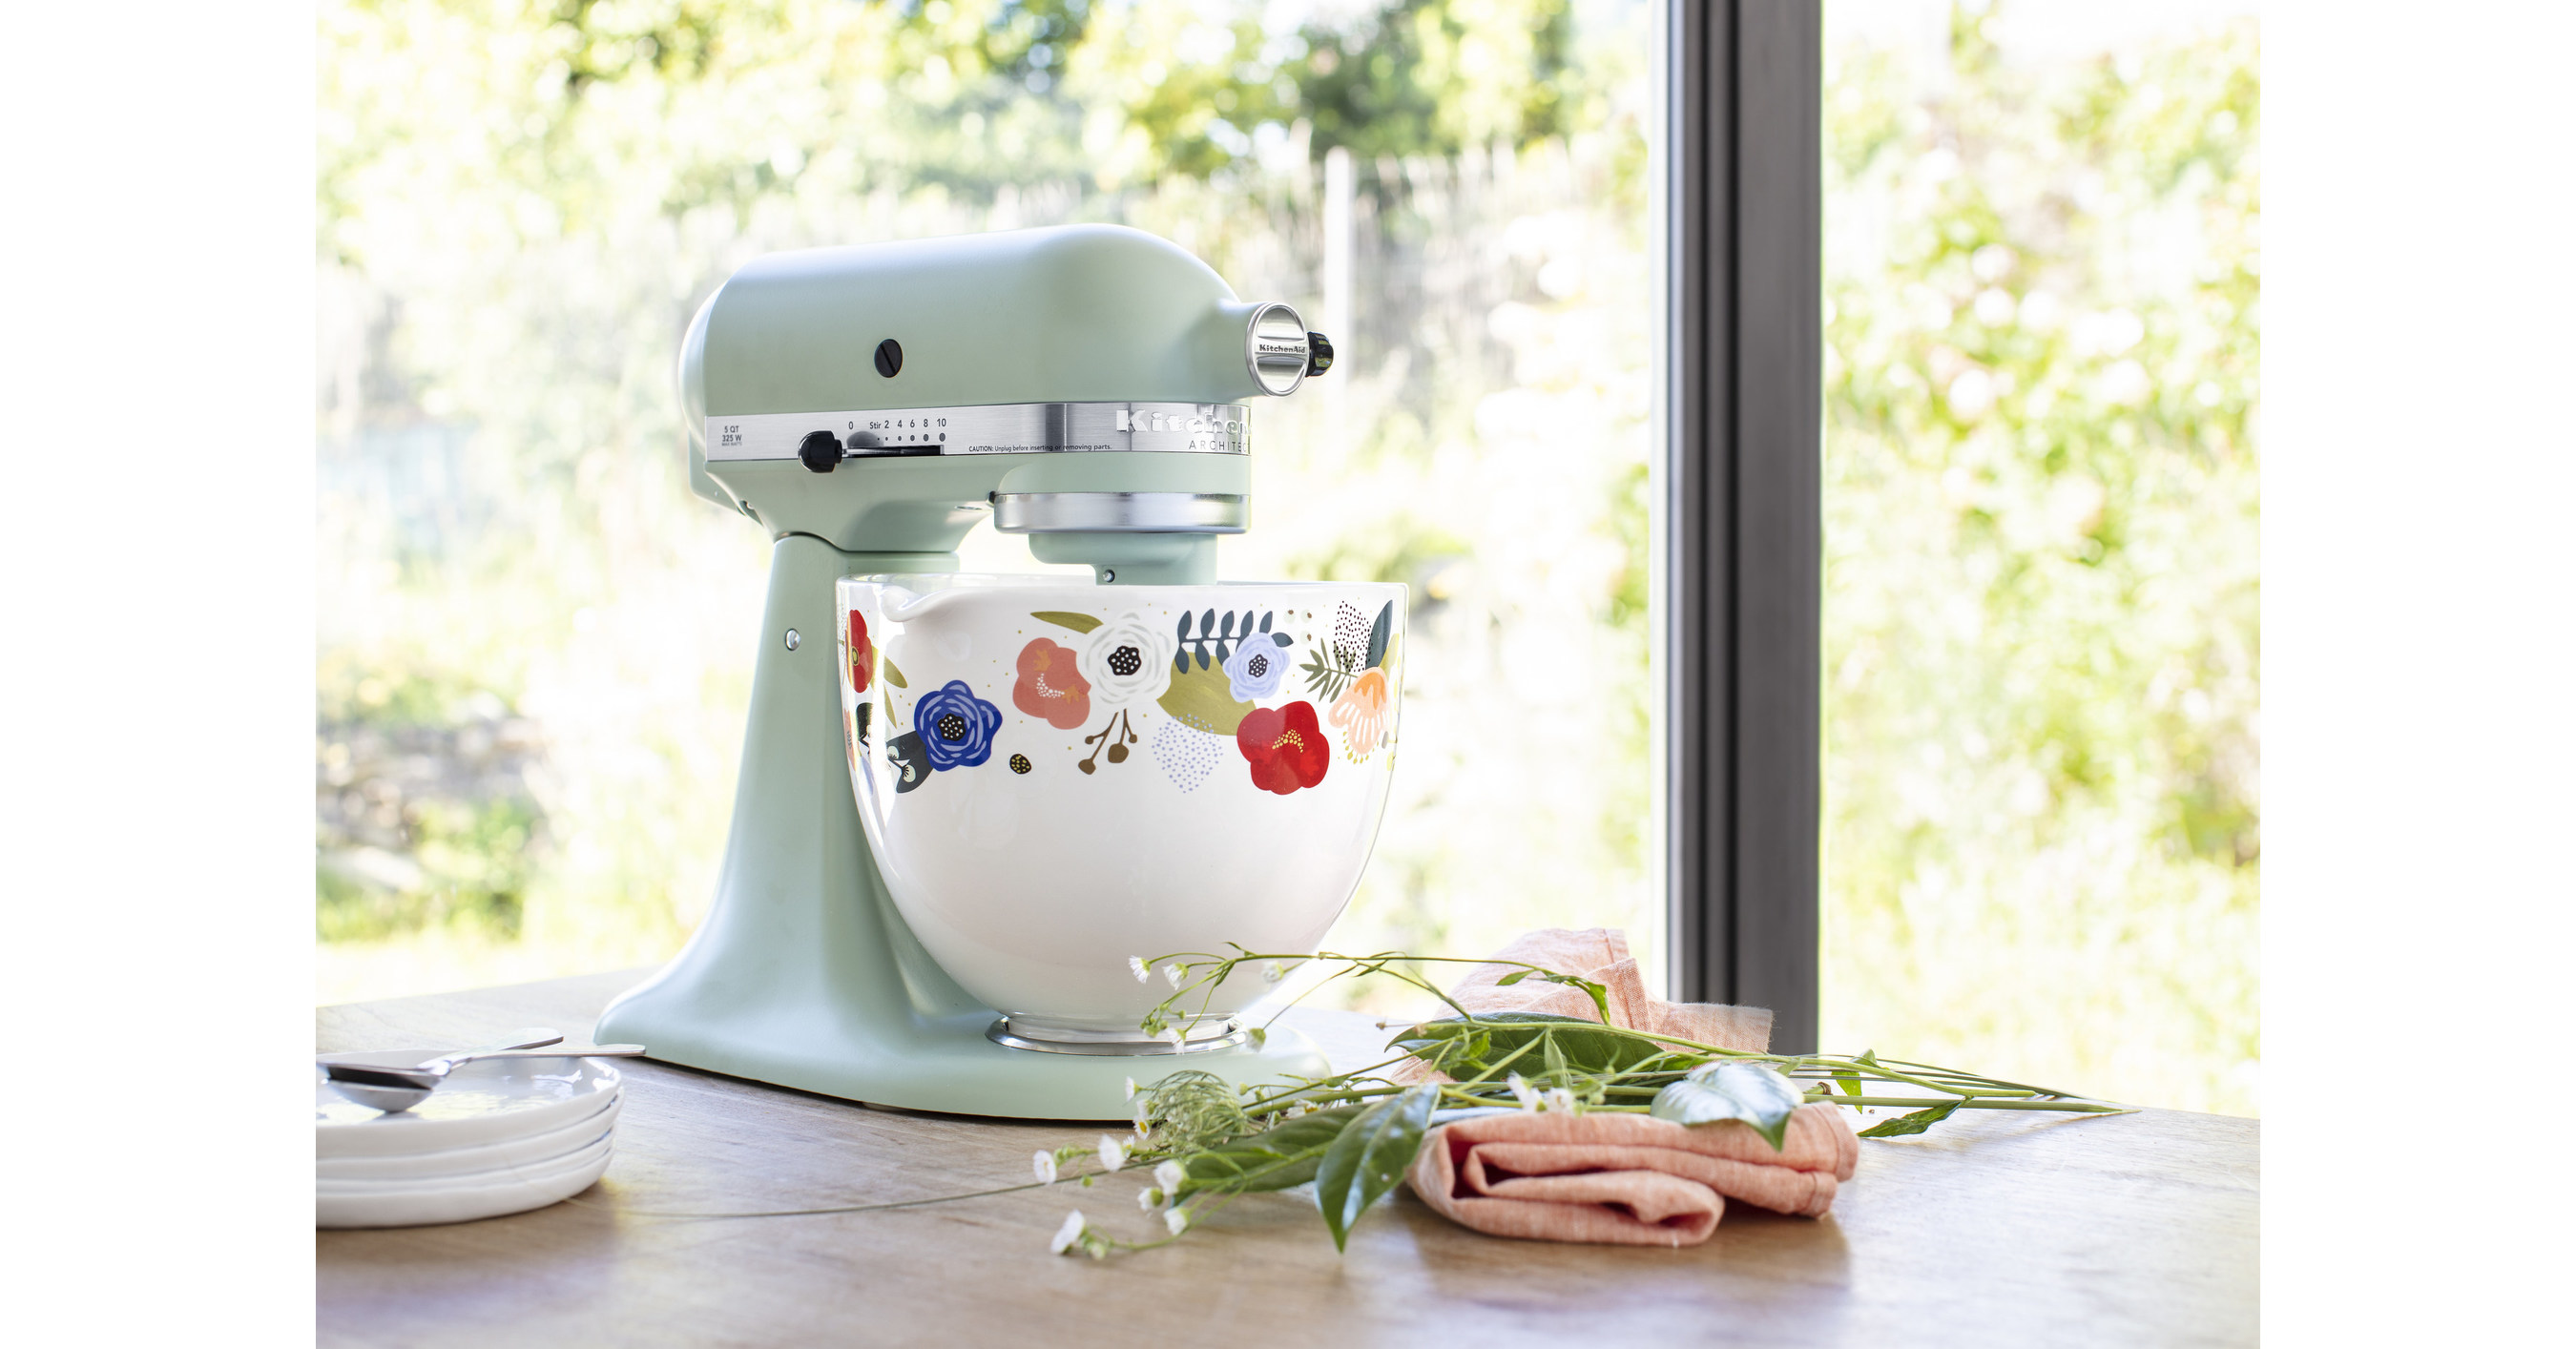 KitchenAid on Instagram: Introducing the Porcelain White Stand Mixer, a  beauty that effortlessly makes its mark. A new addition to your kitchen  with a soft dash of warmth, that brings naturally-stylish ease.